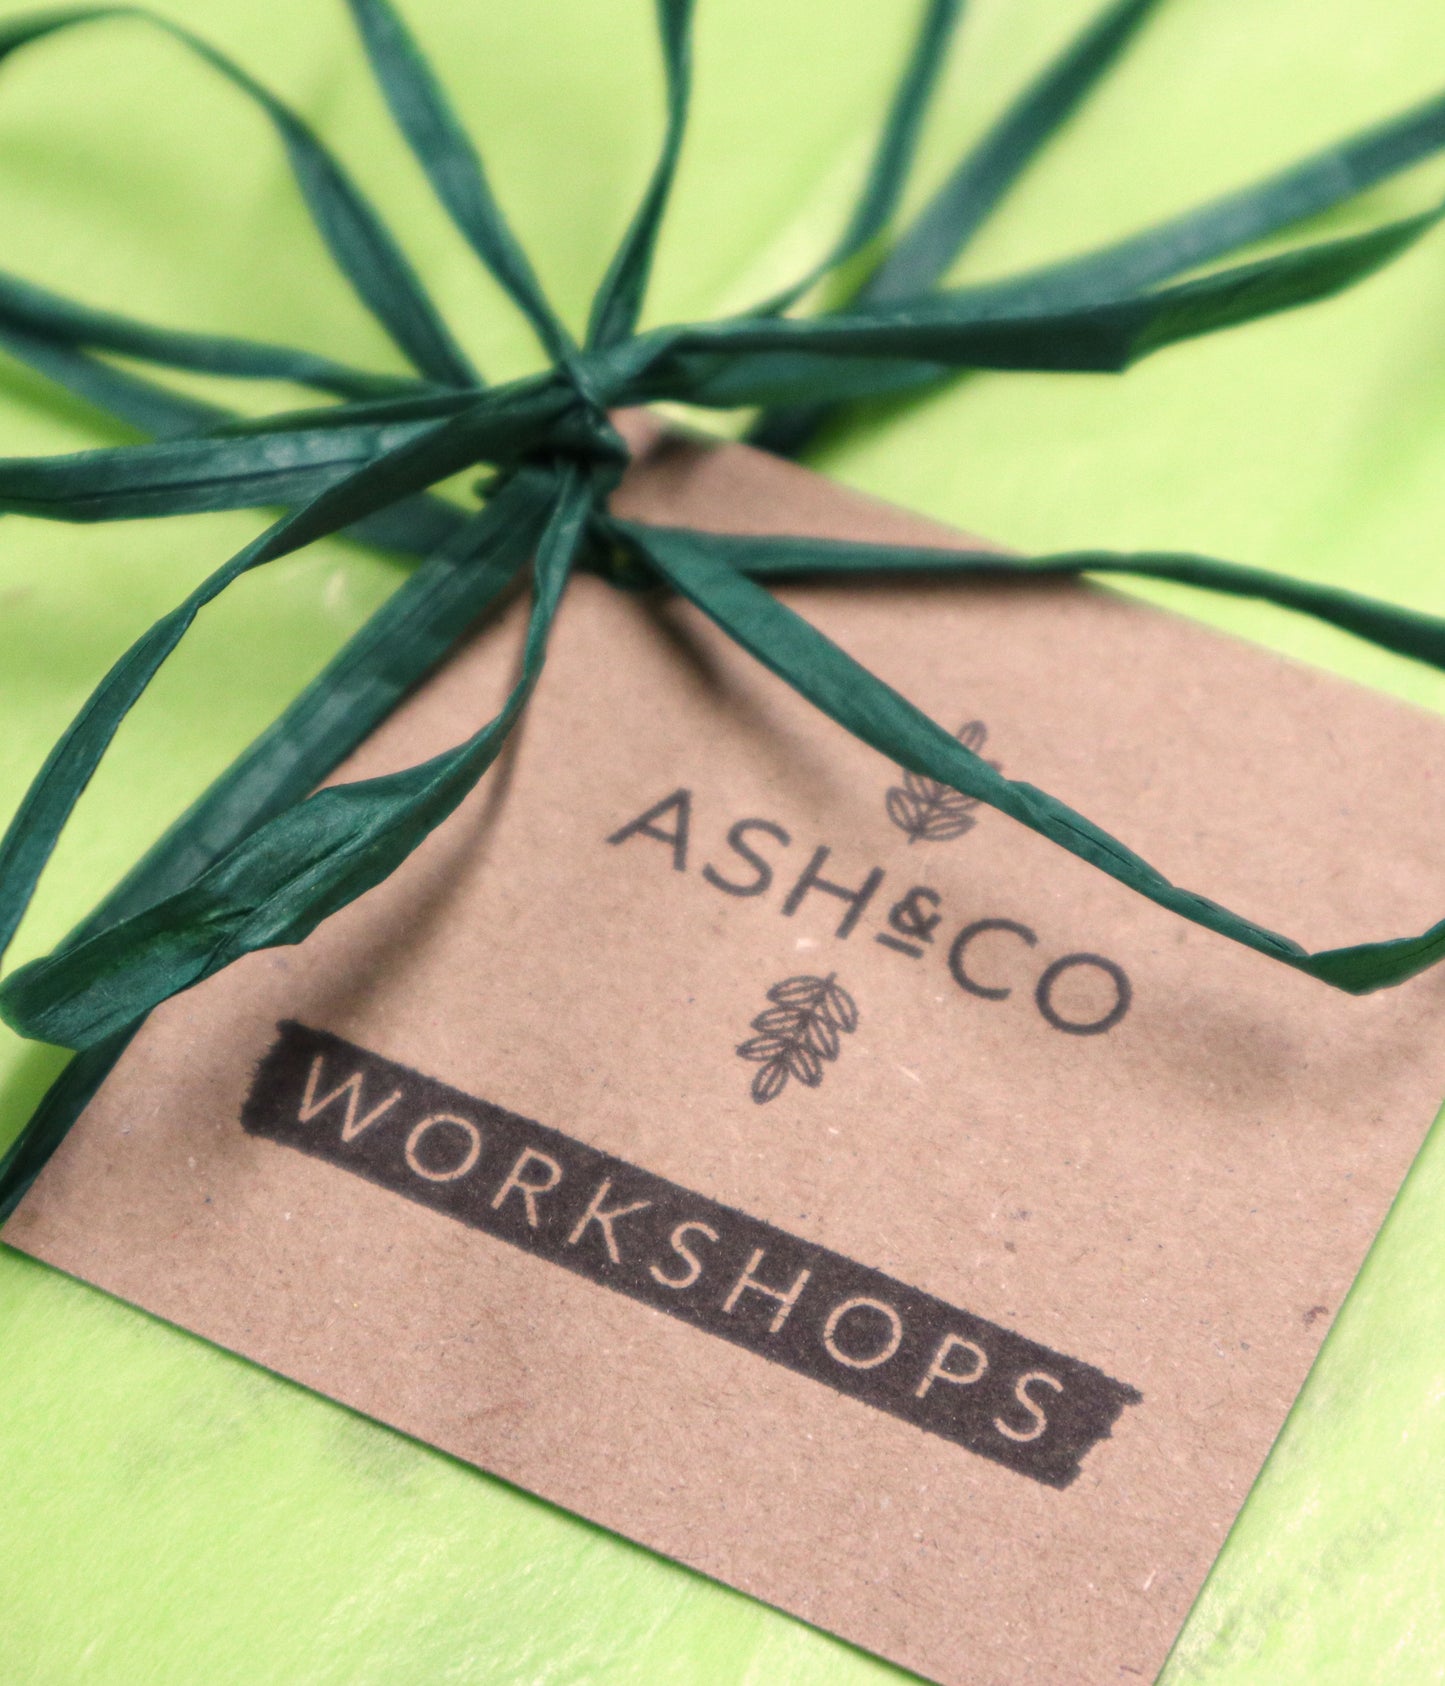 Gift wrapping from Ash & Co. Workshops